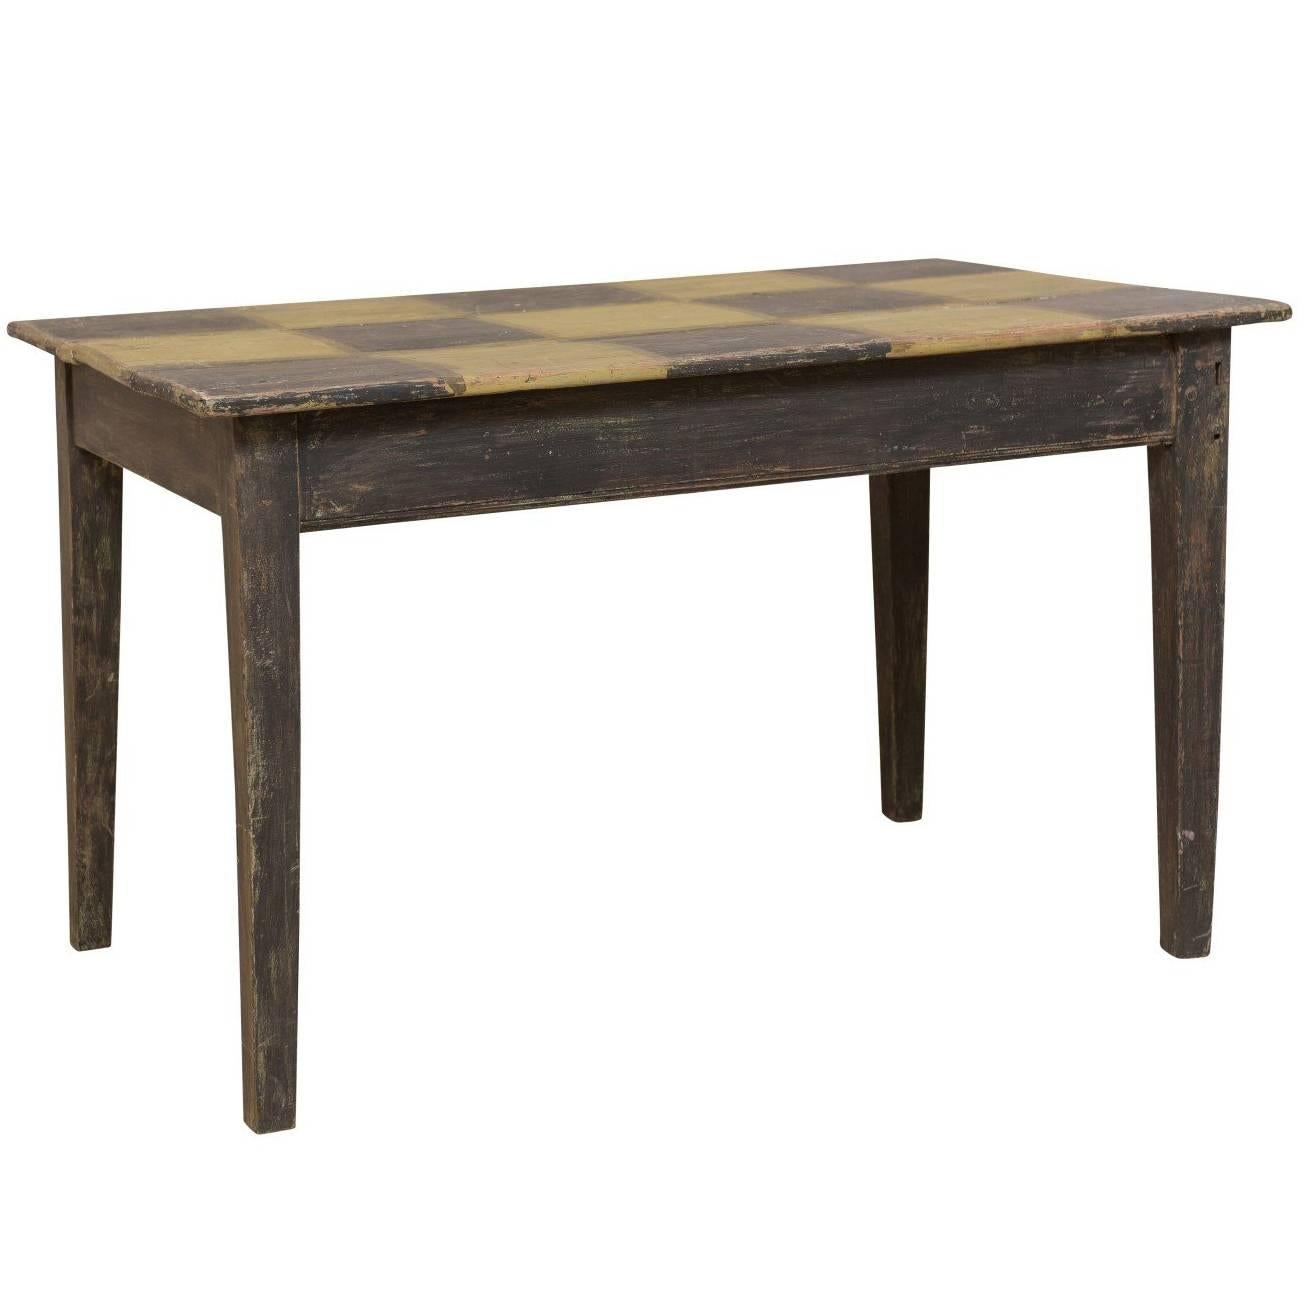 19th Century Swedish Painted Wood Dark Checker Top Table with Nice Tapered Legs For Sale